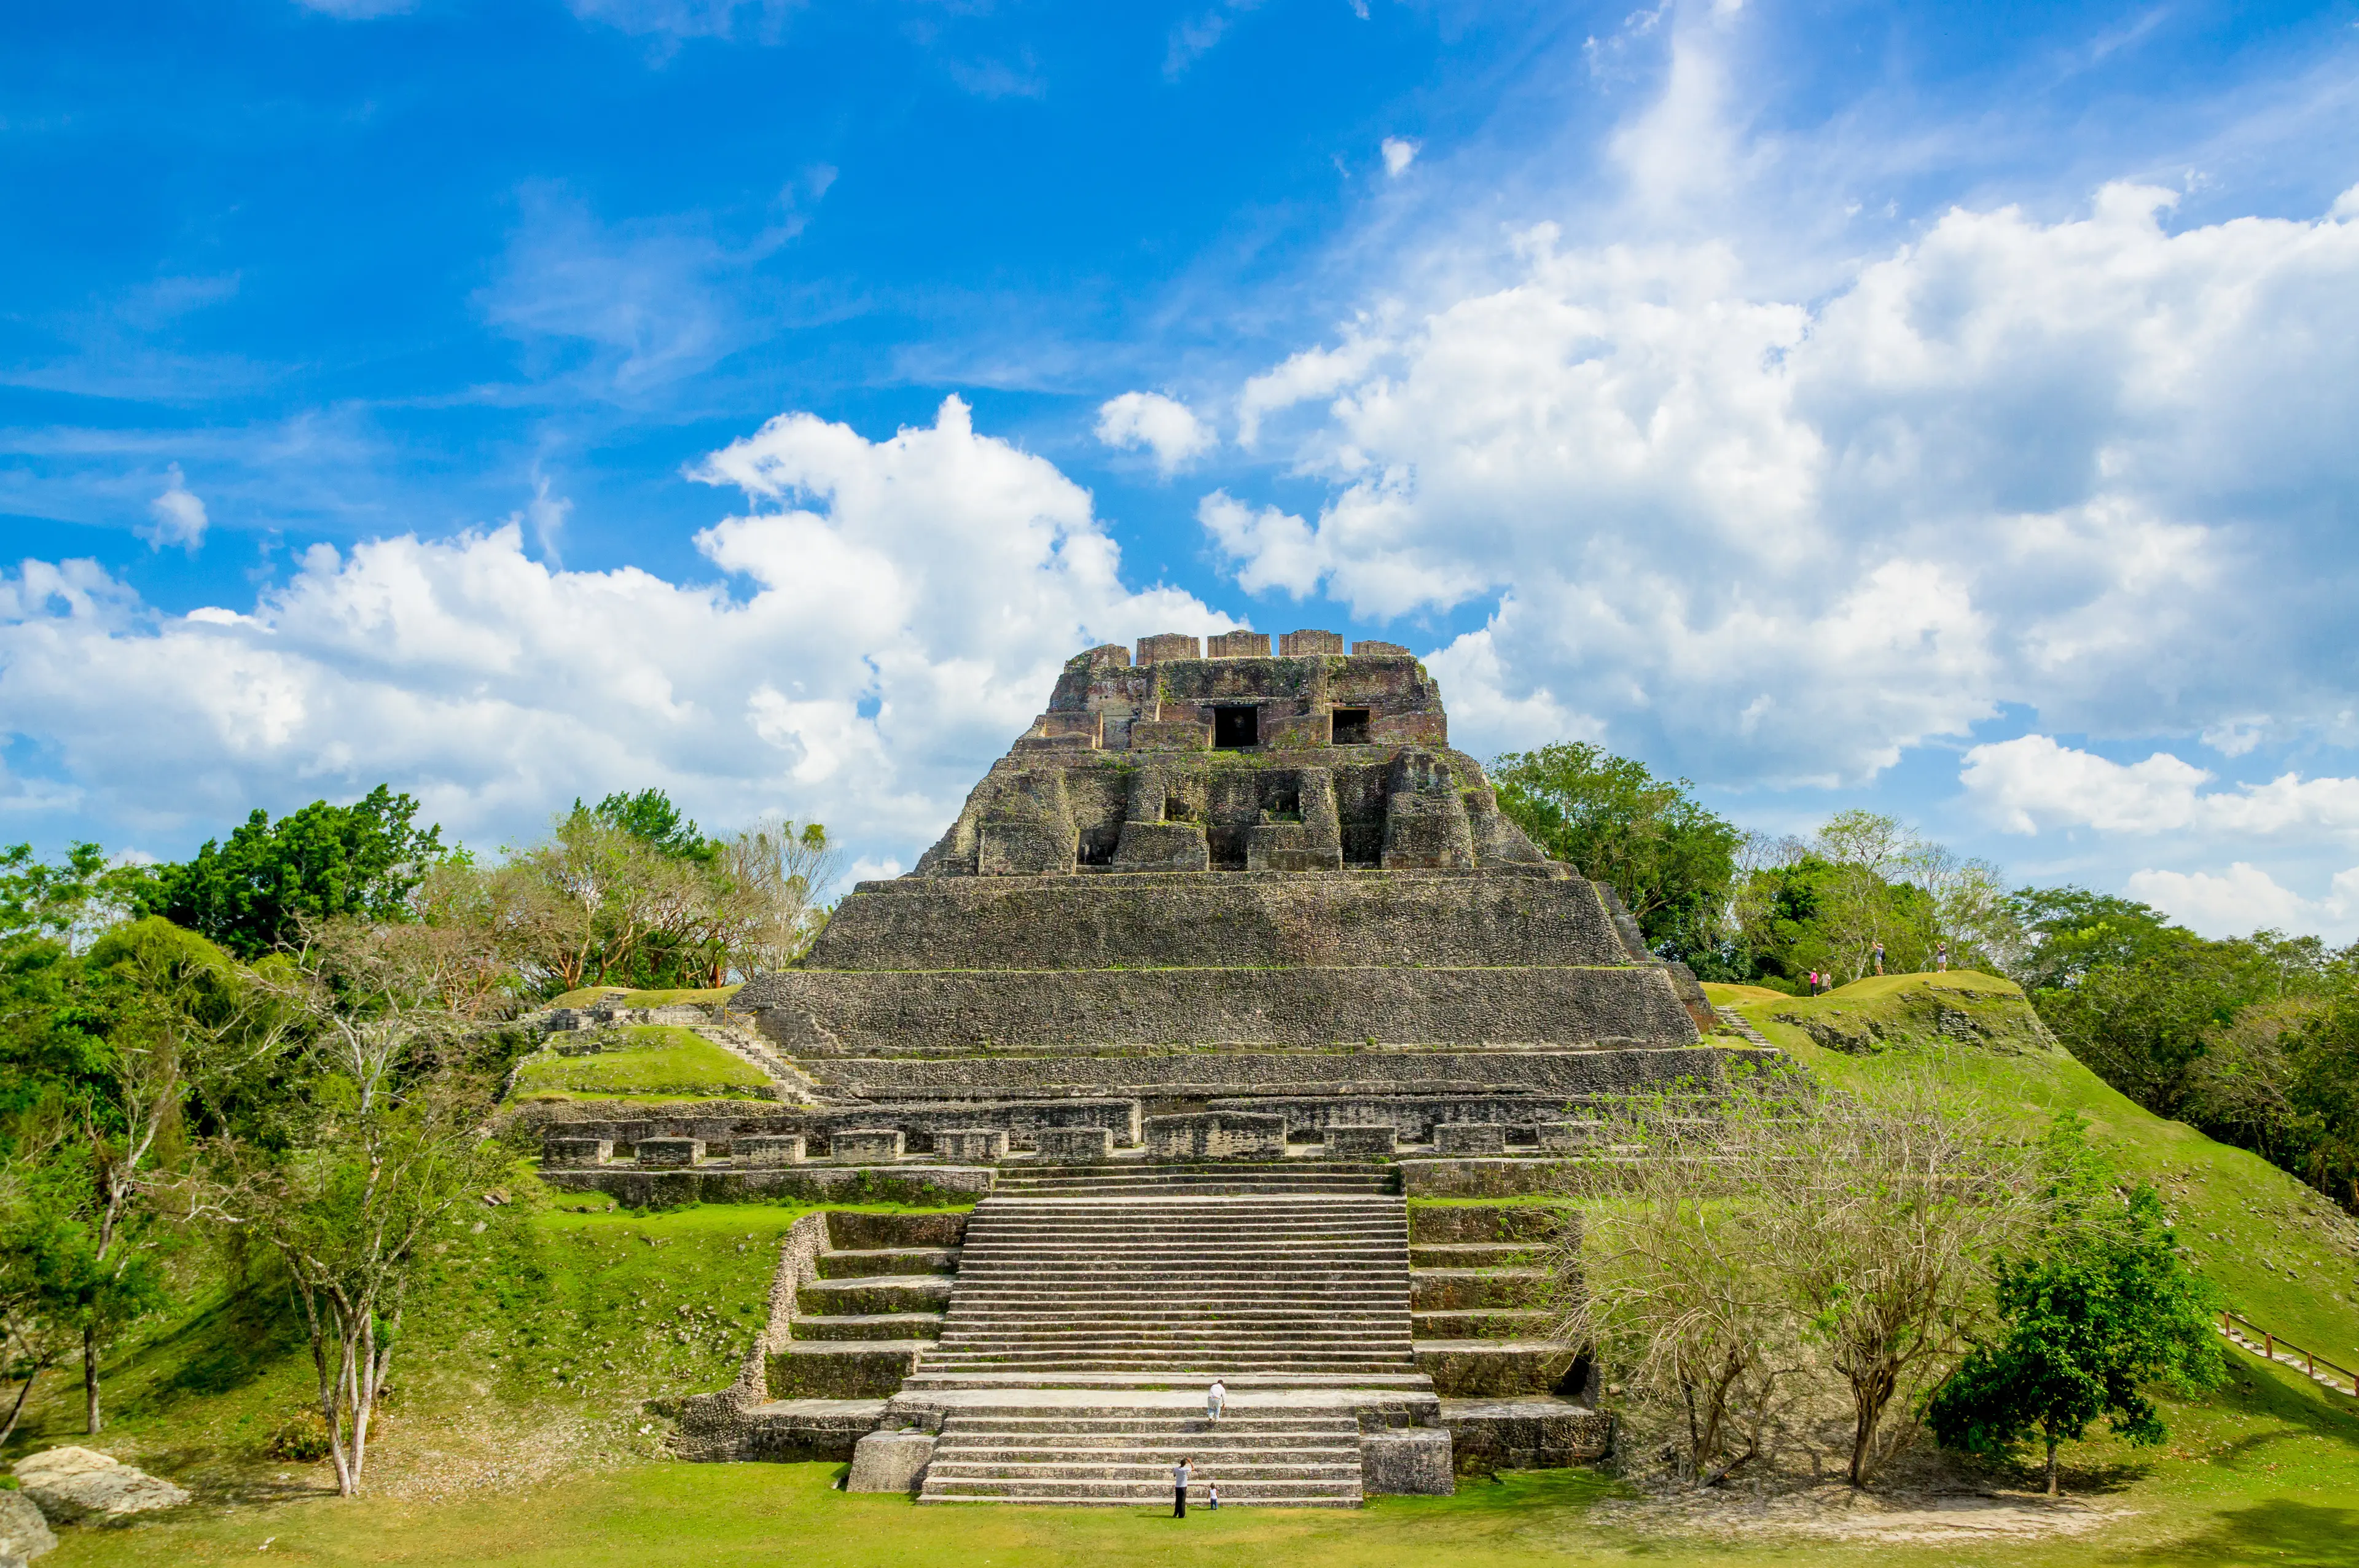 4-Day Family Adventure: Sightseeing & Shopping in Belize